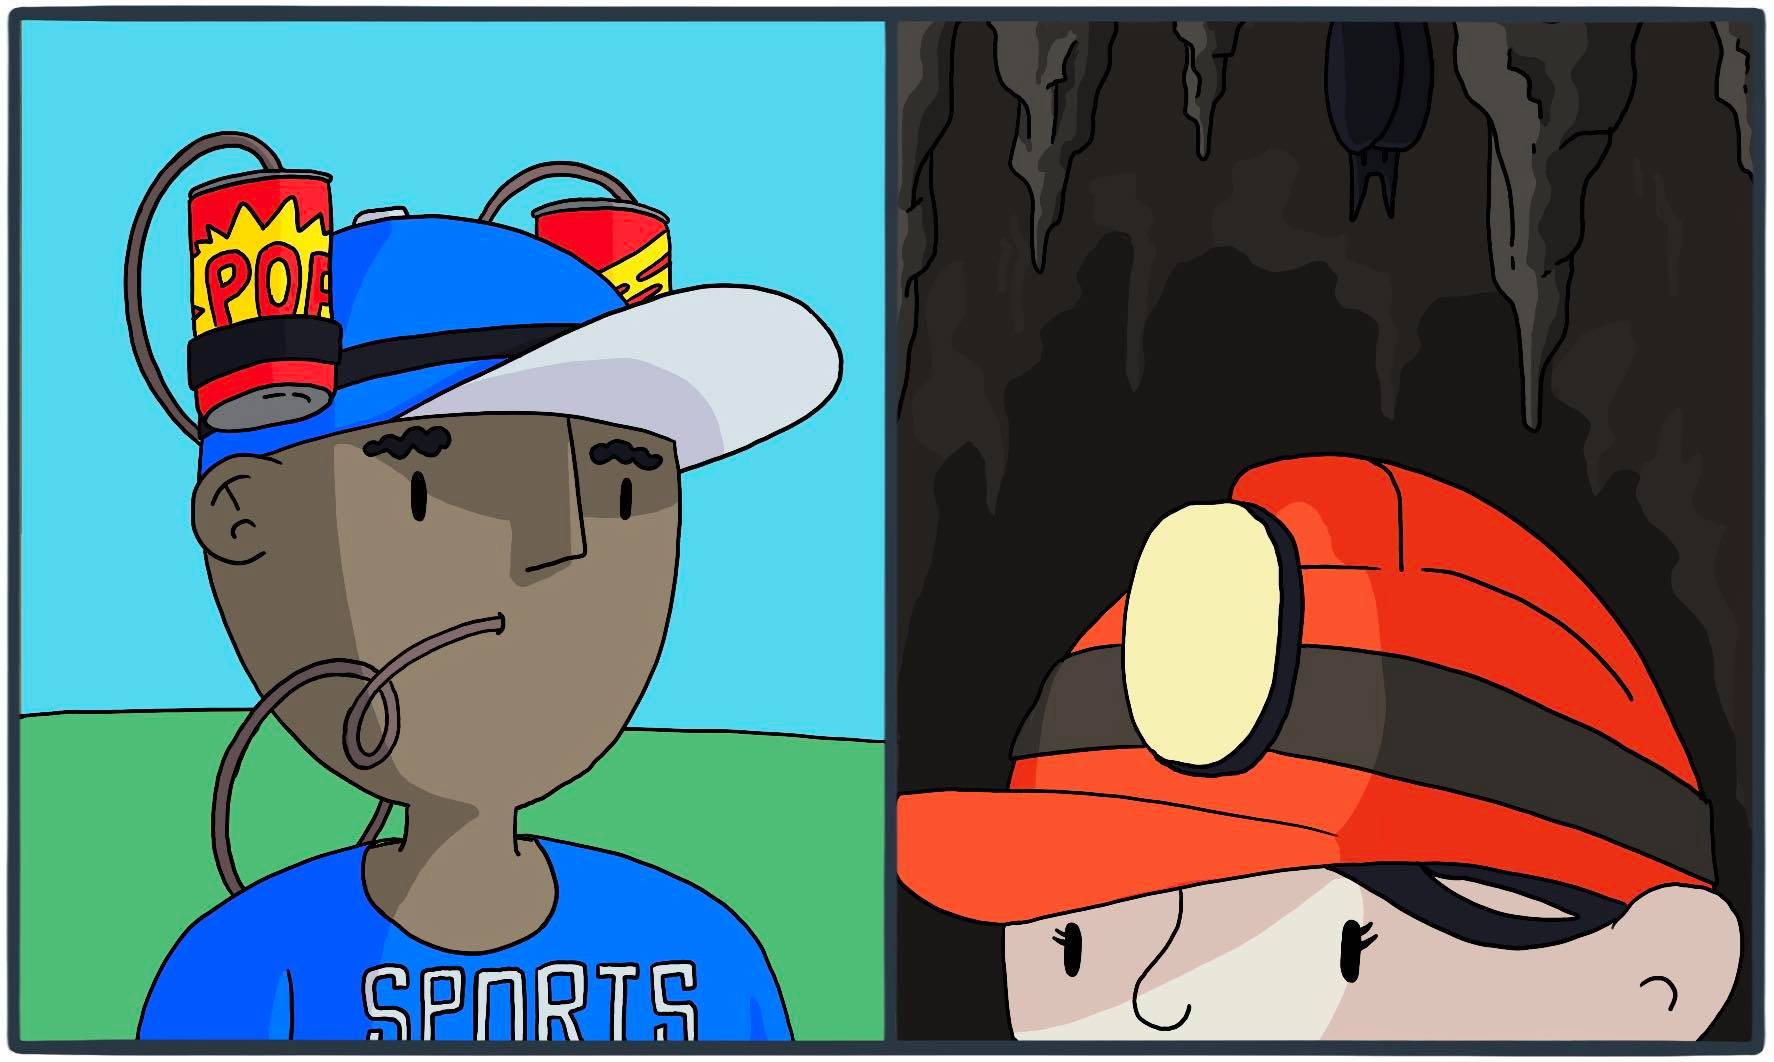 Soda hat on the left and mines cap on the right.